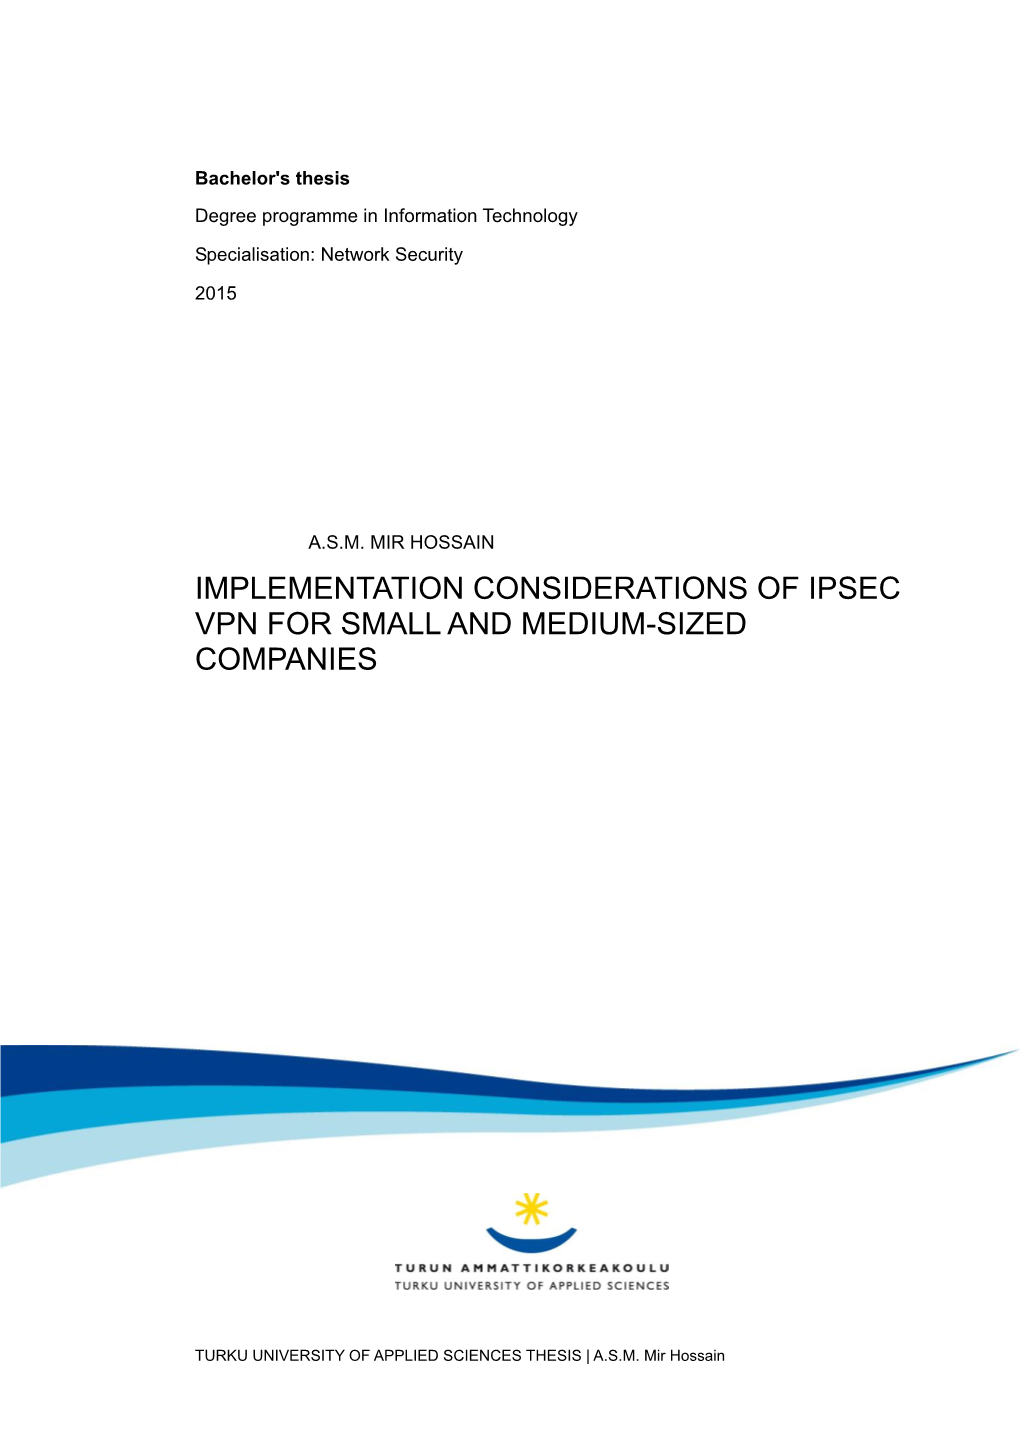 Implementation Considerations of Ipsec Vpn for Small and Medium-Sized Companies